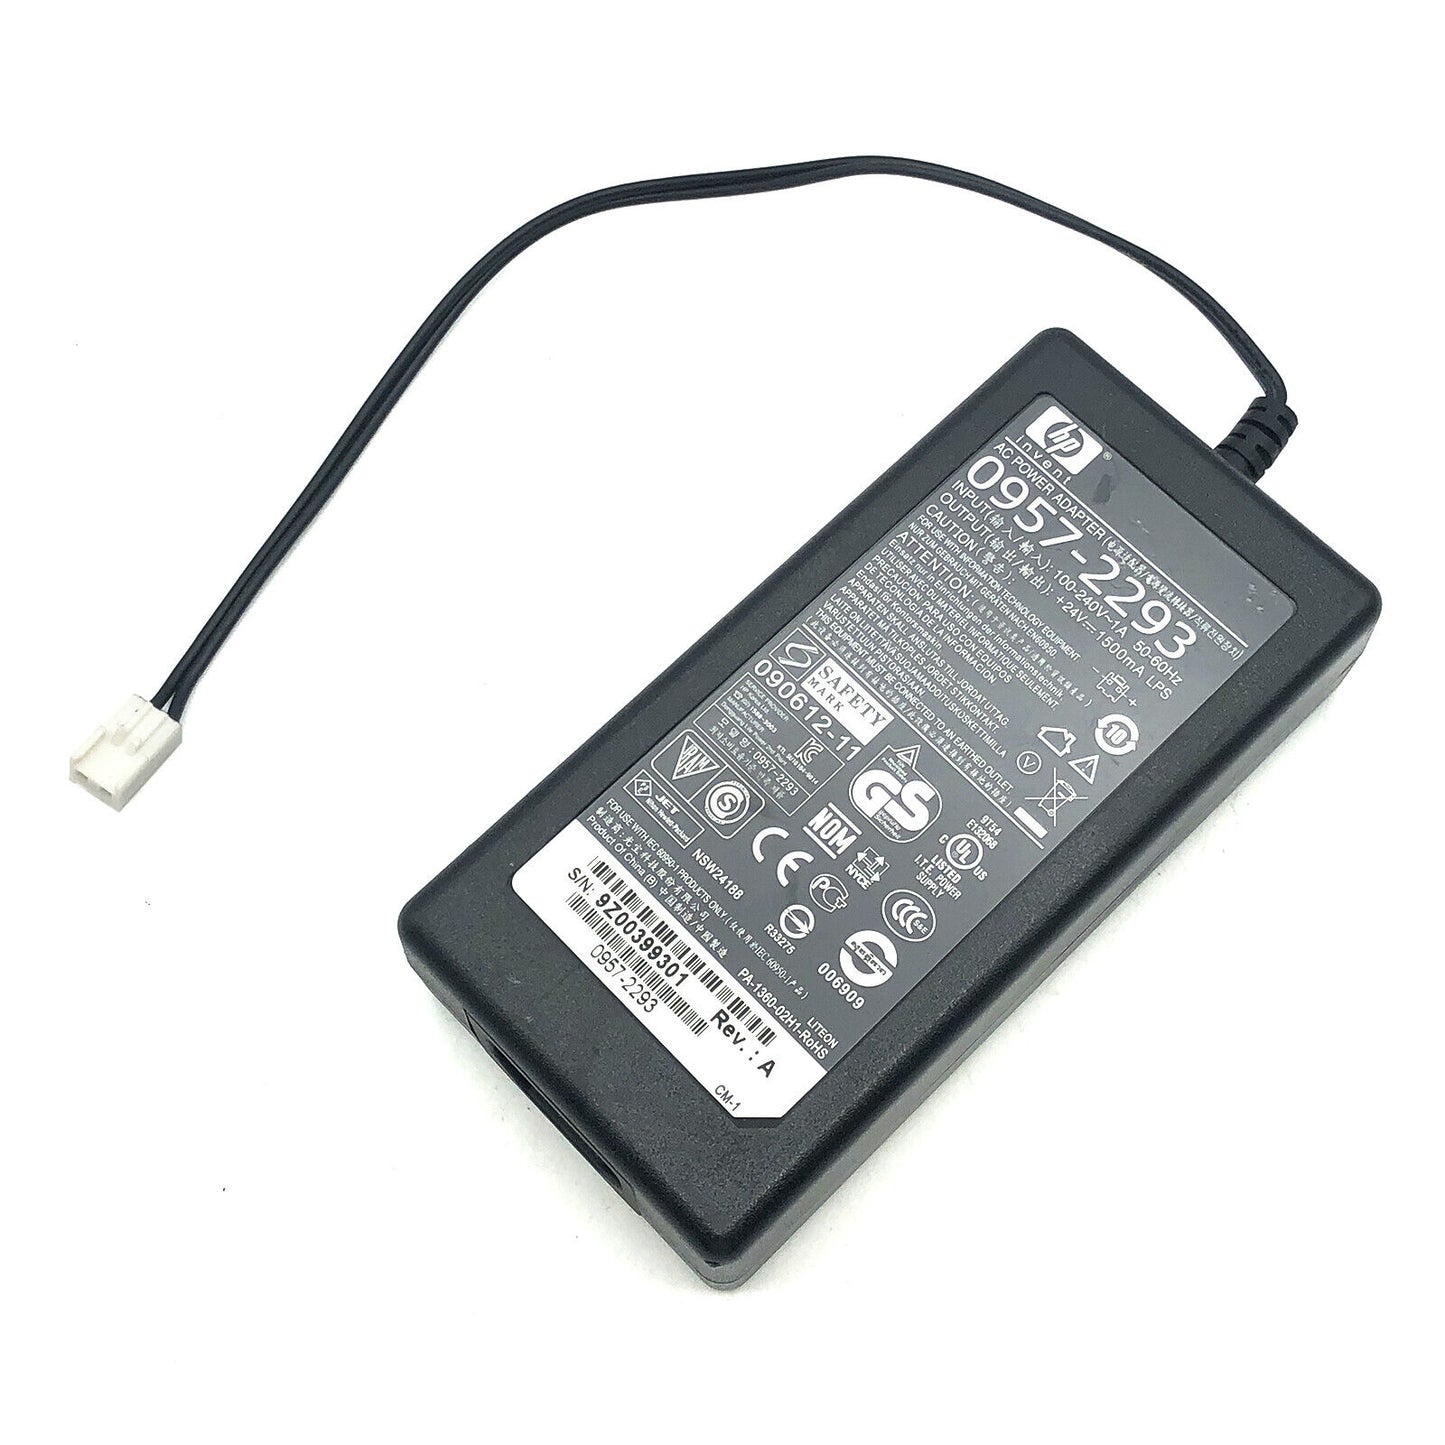 OEM AC Adapter for HP LaseJet printers 0957-2293 w/PC